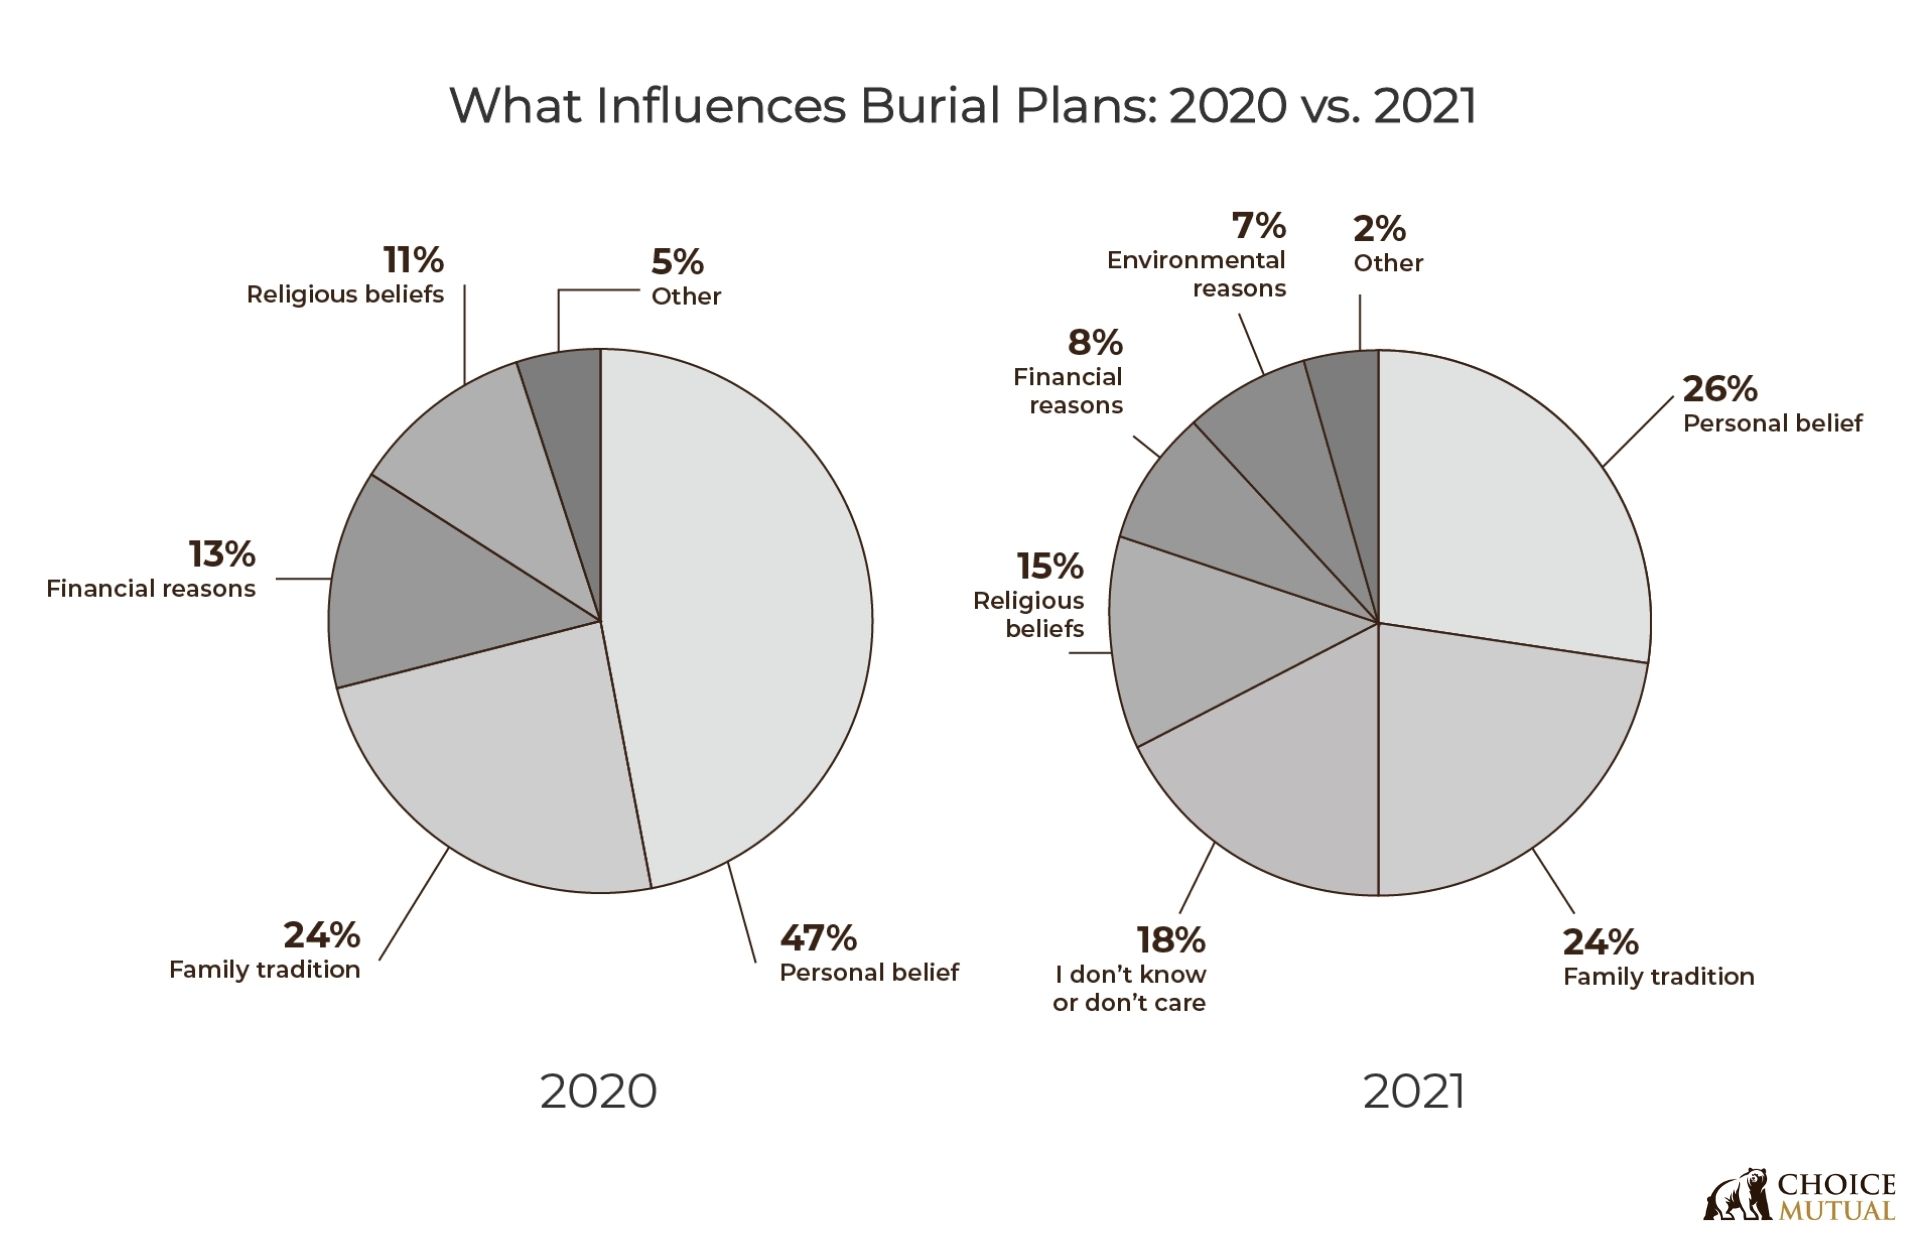 Pie charts showing burial preferences in 2021 compared to 2020